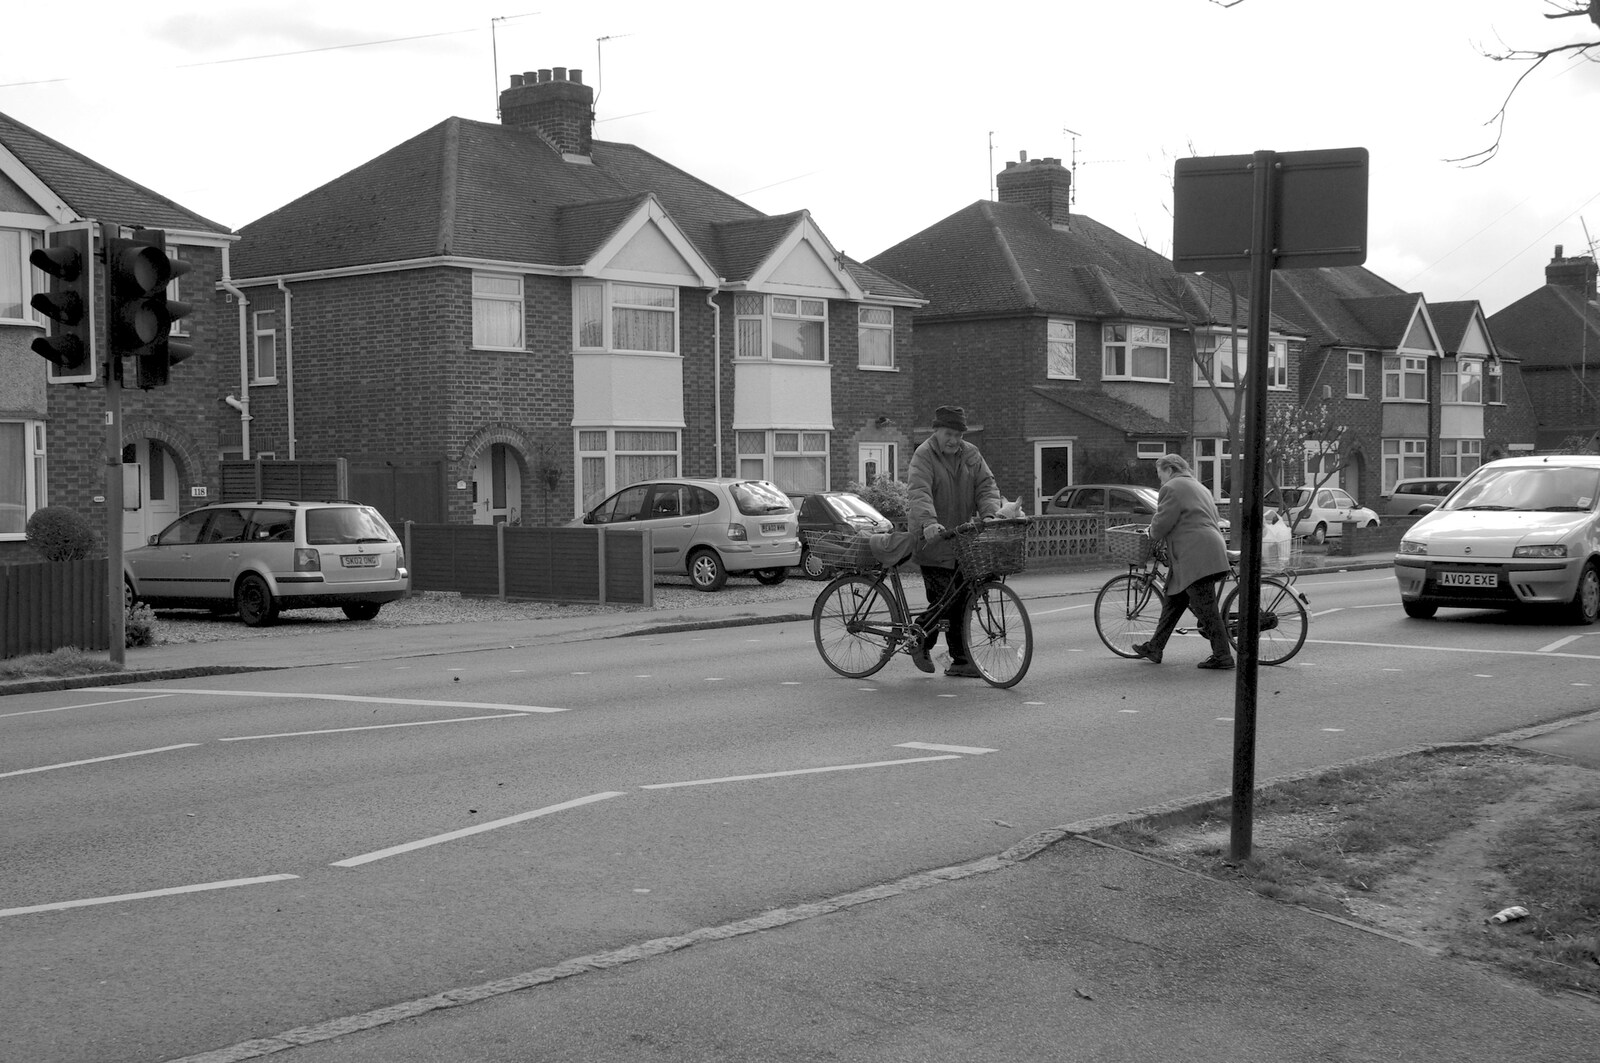 A couple of cyclists cross the road from The Derelict Salam Newsagents, Perne Road, Cambridge - 18th March 2007